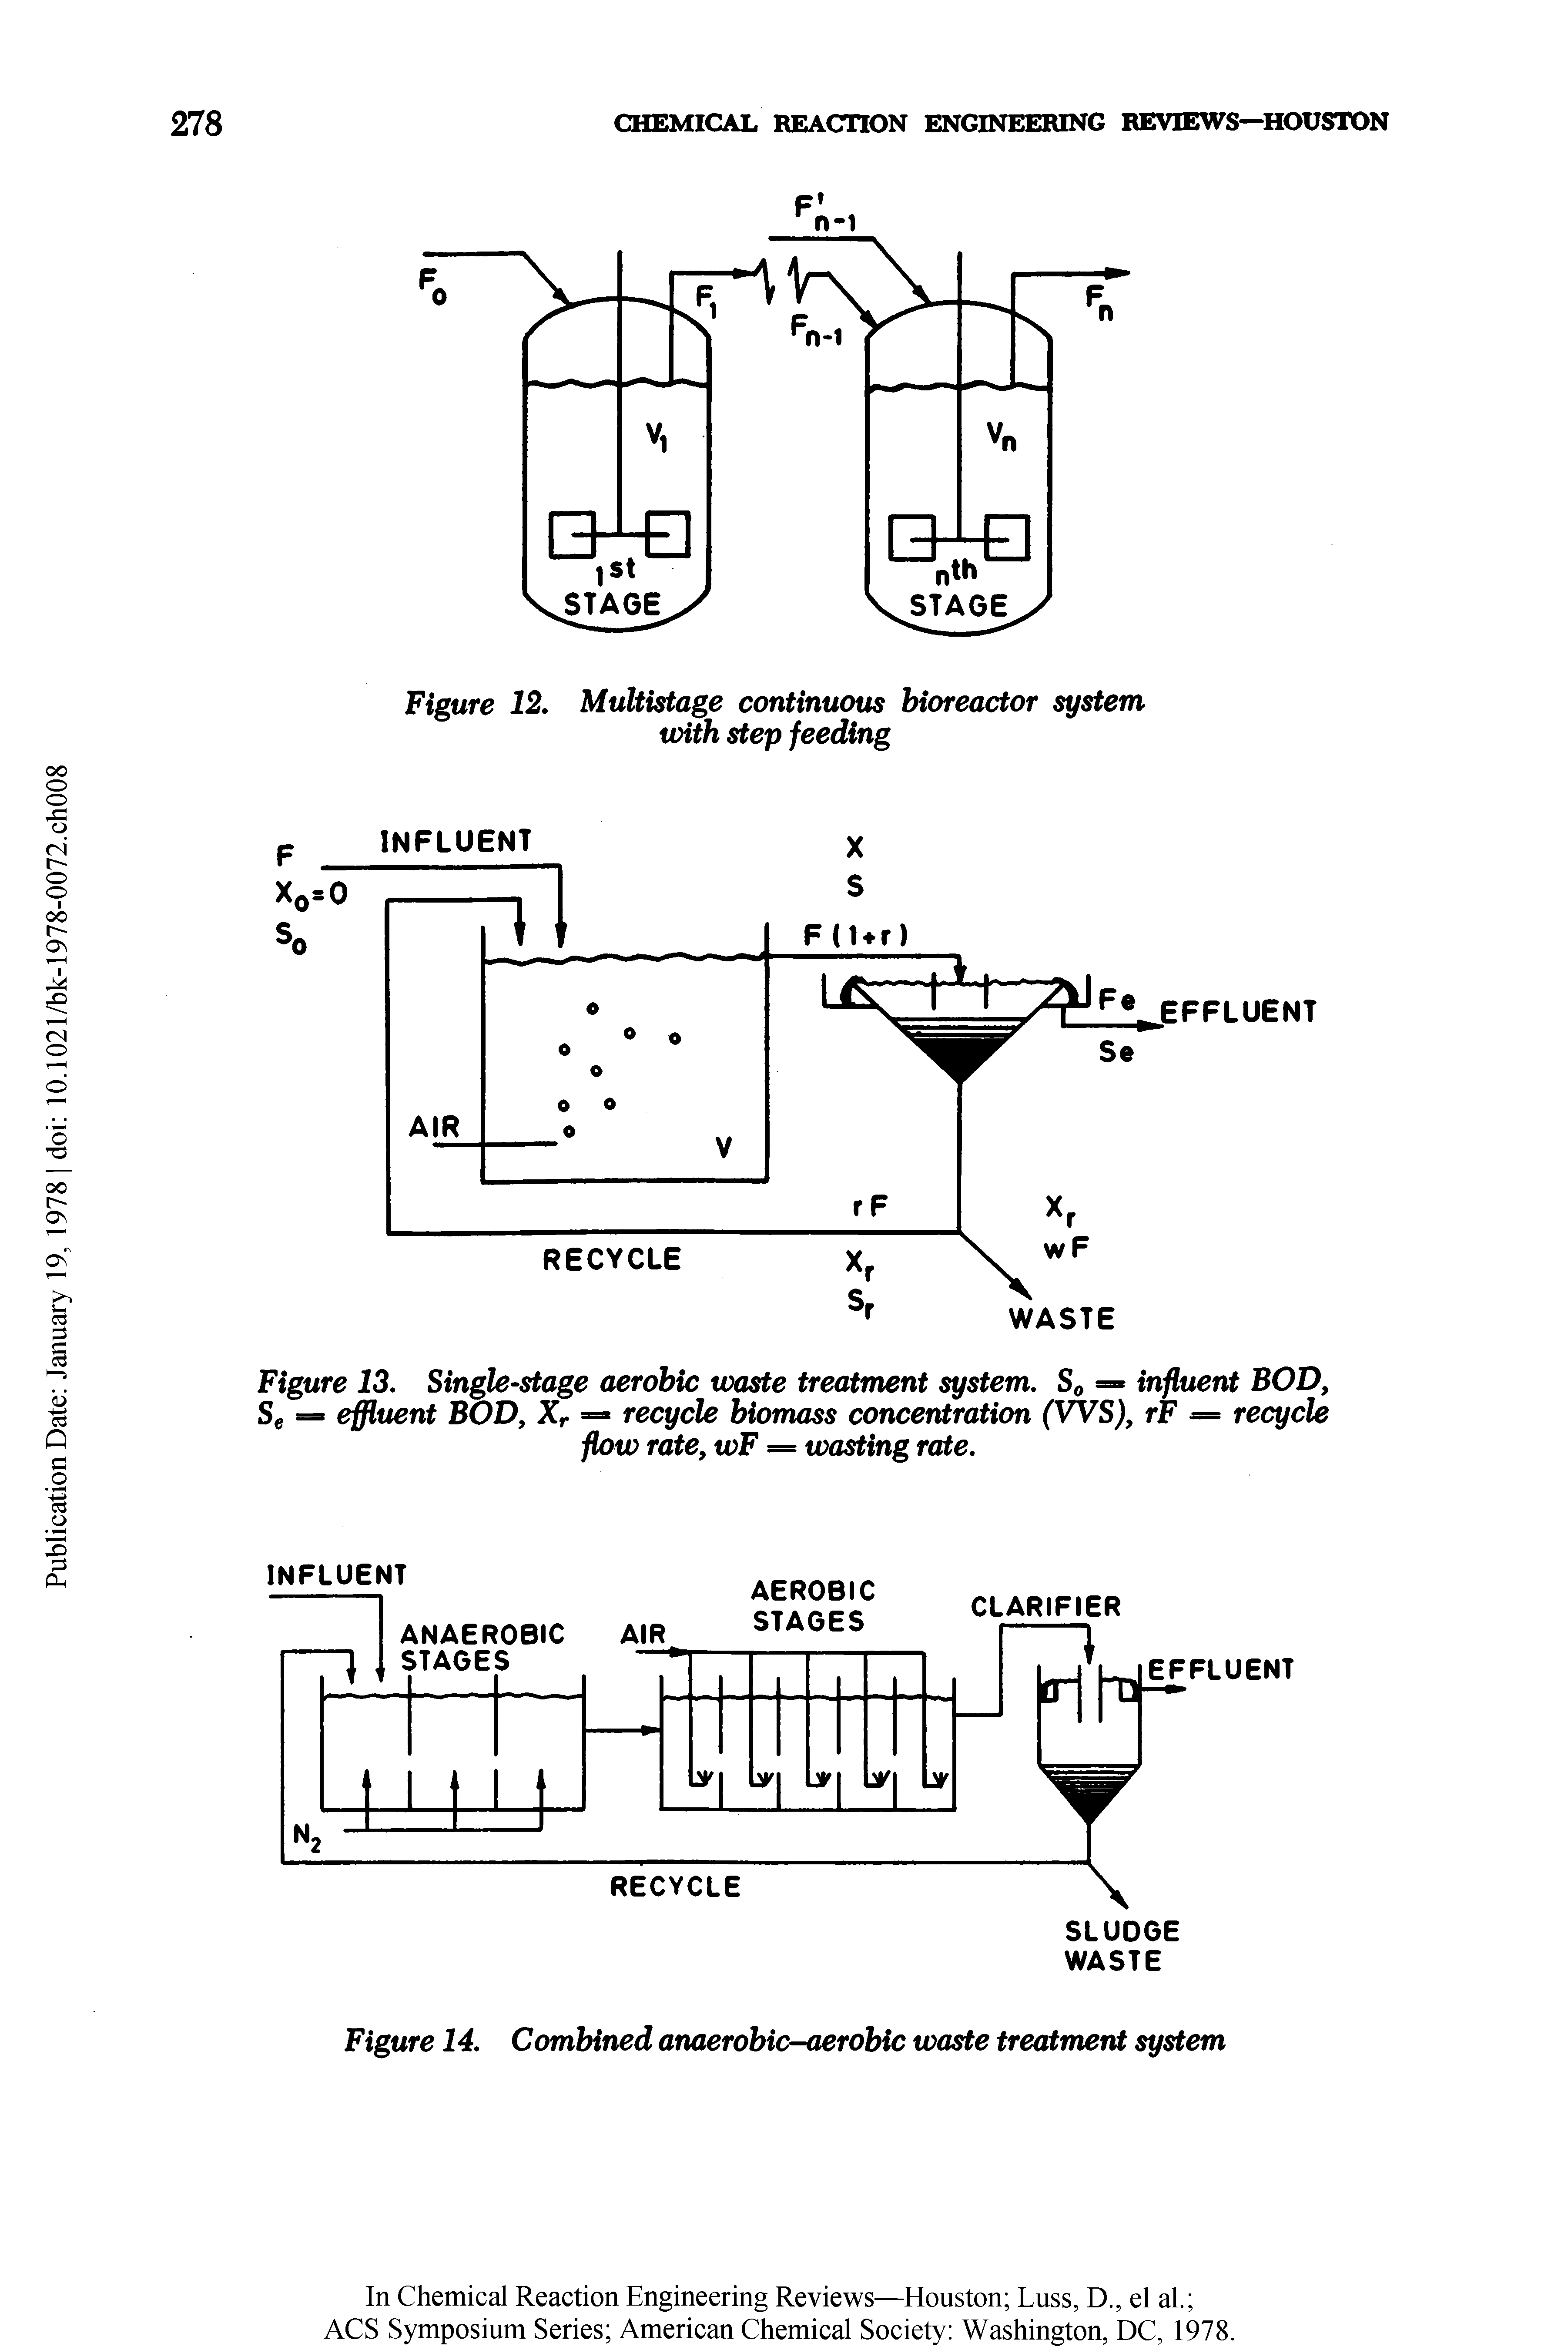 Figure 13. Single-stage aerobic waste treatment system. So = influent BOD, Sg = effluent BOD, Xr recycle biomass concentration (VVS), rF = recycle flow rate, wF = wasting rate.